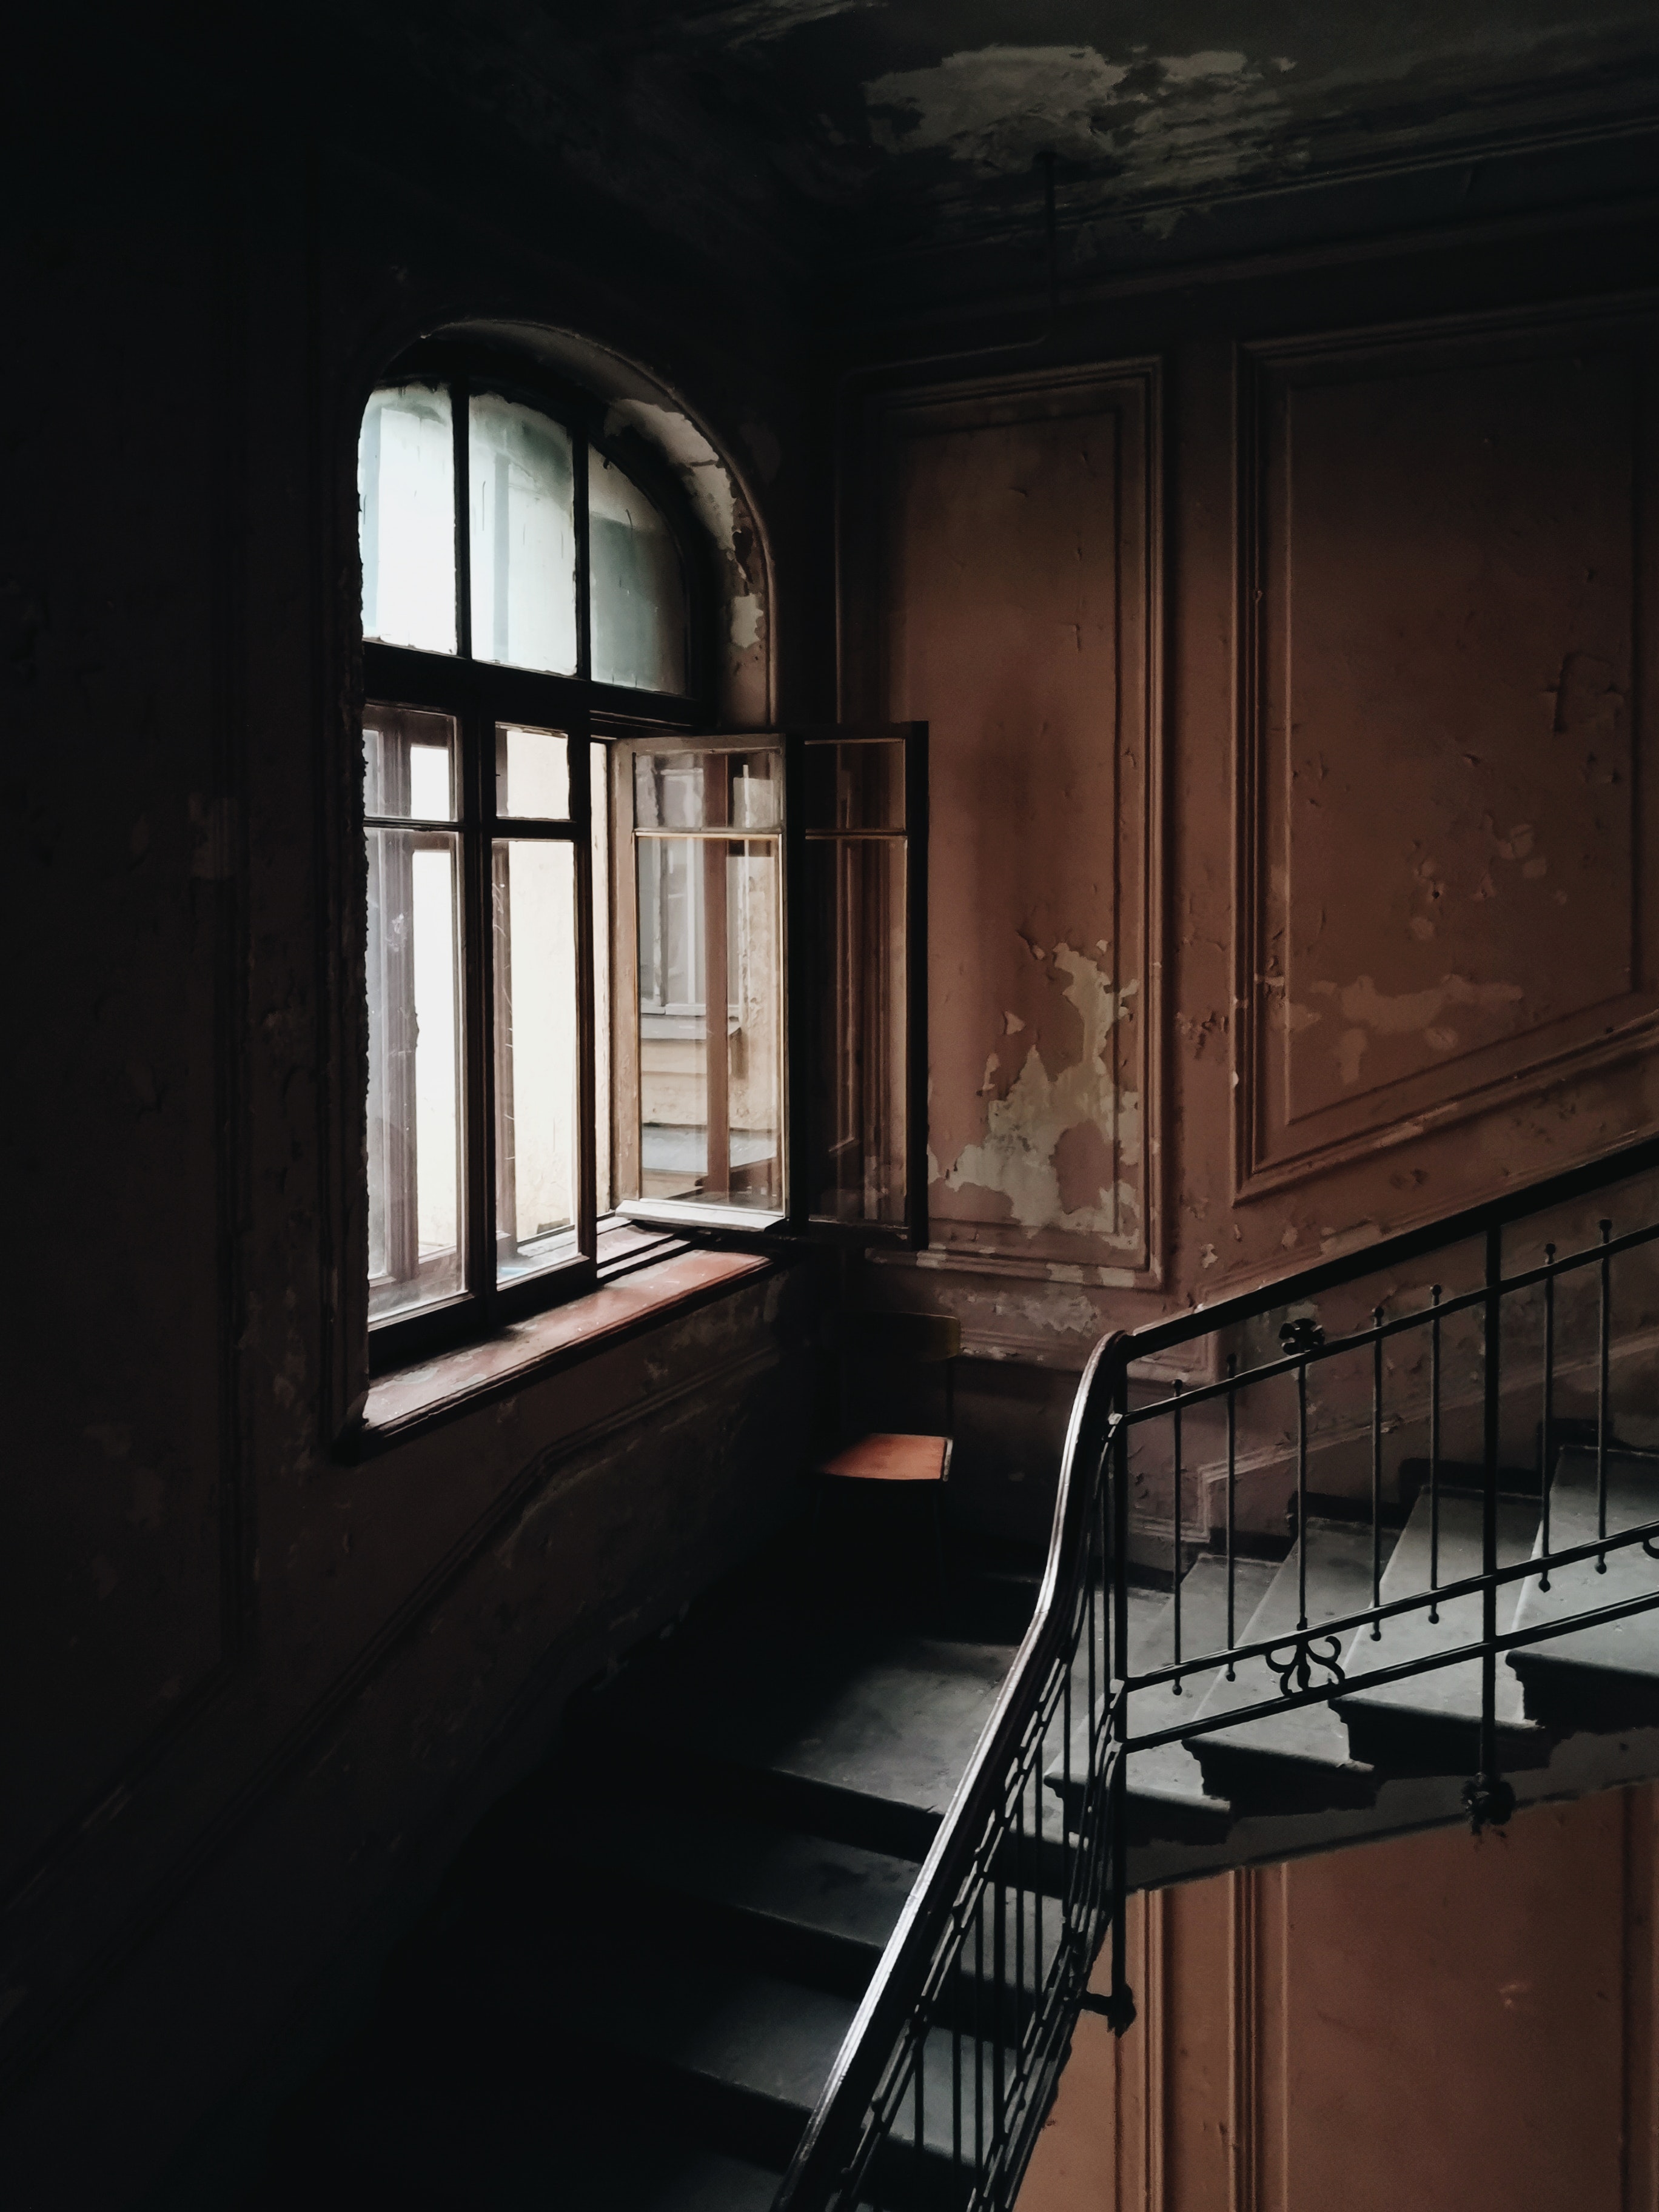 Dark ominous stairwell with natural light peering through the window